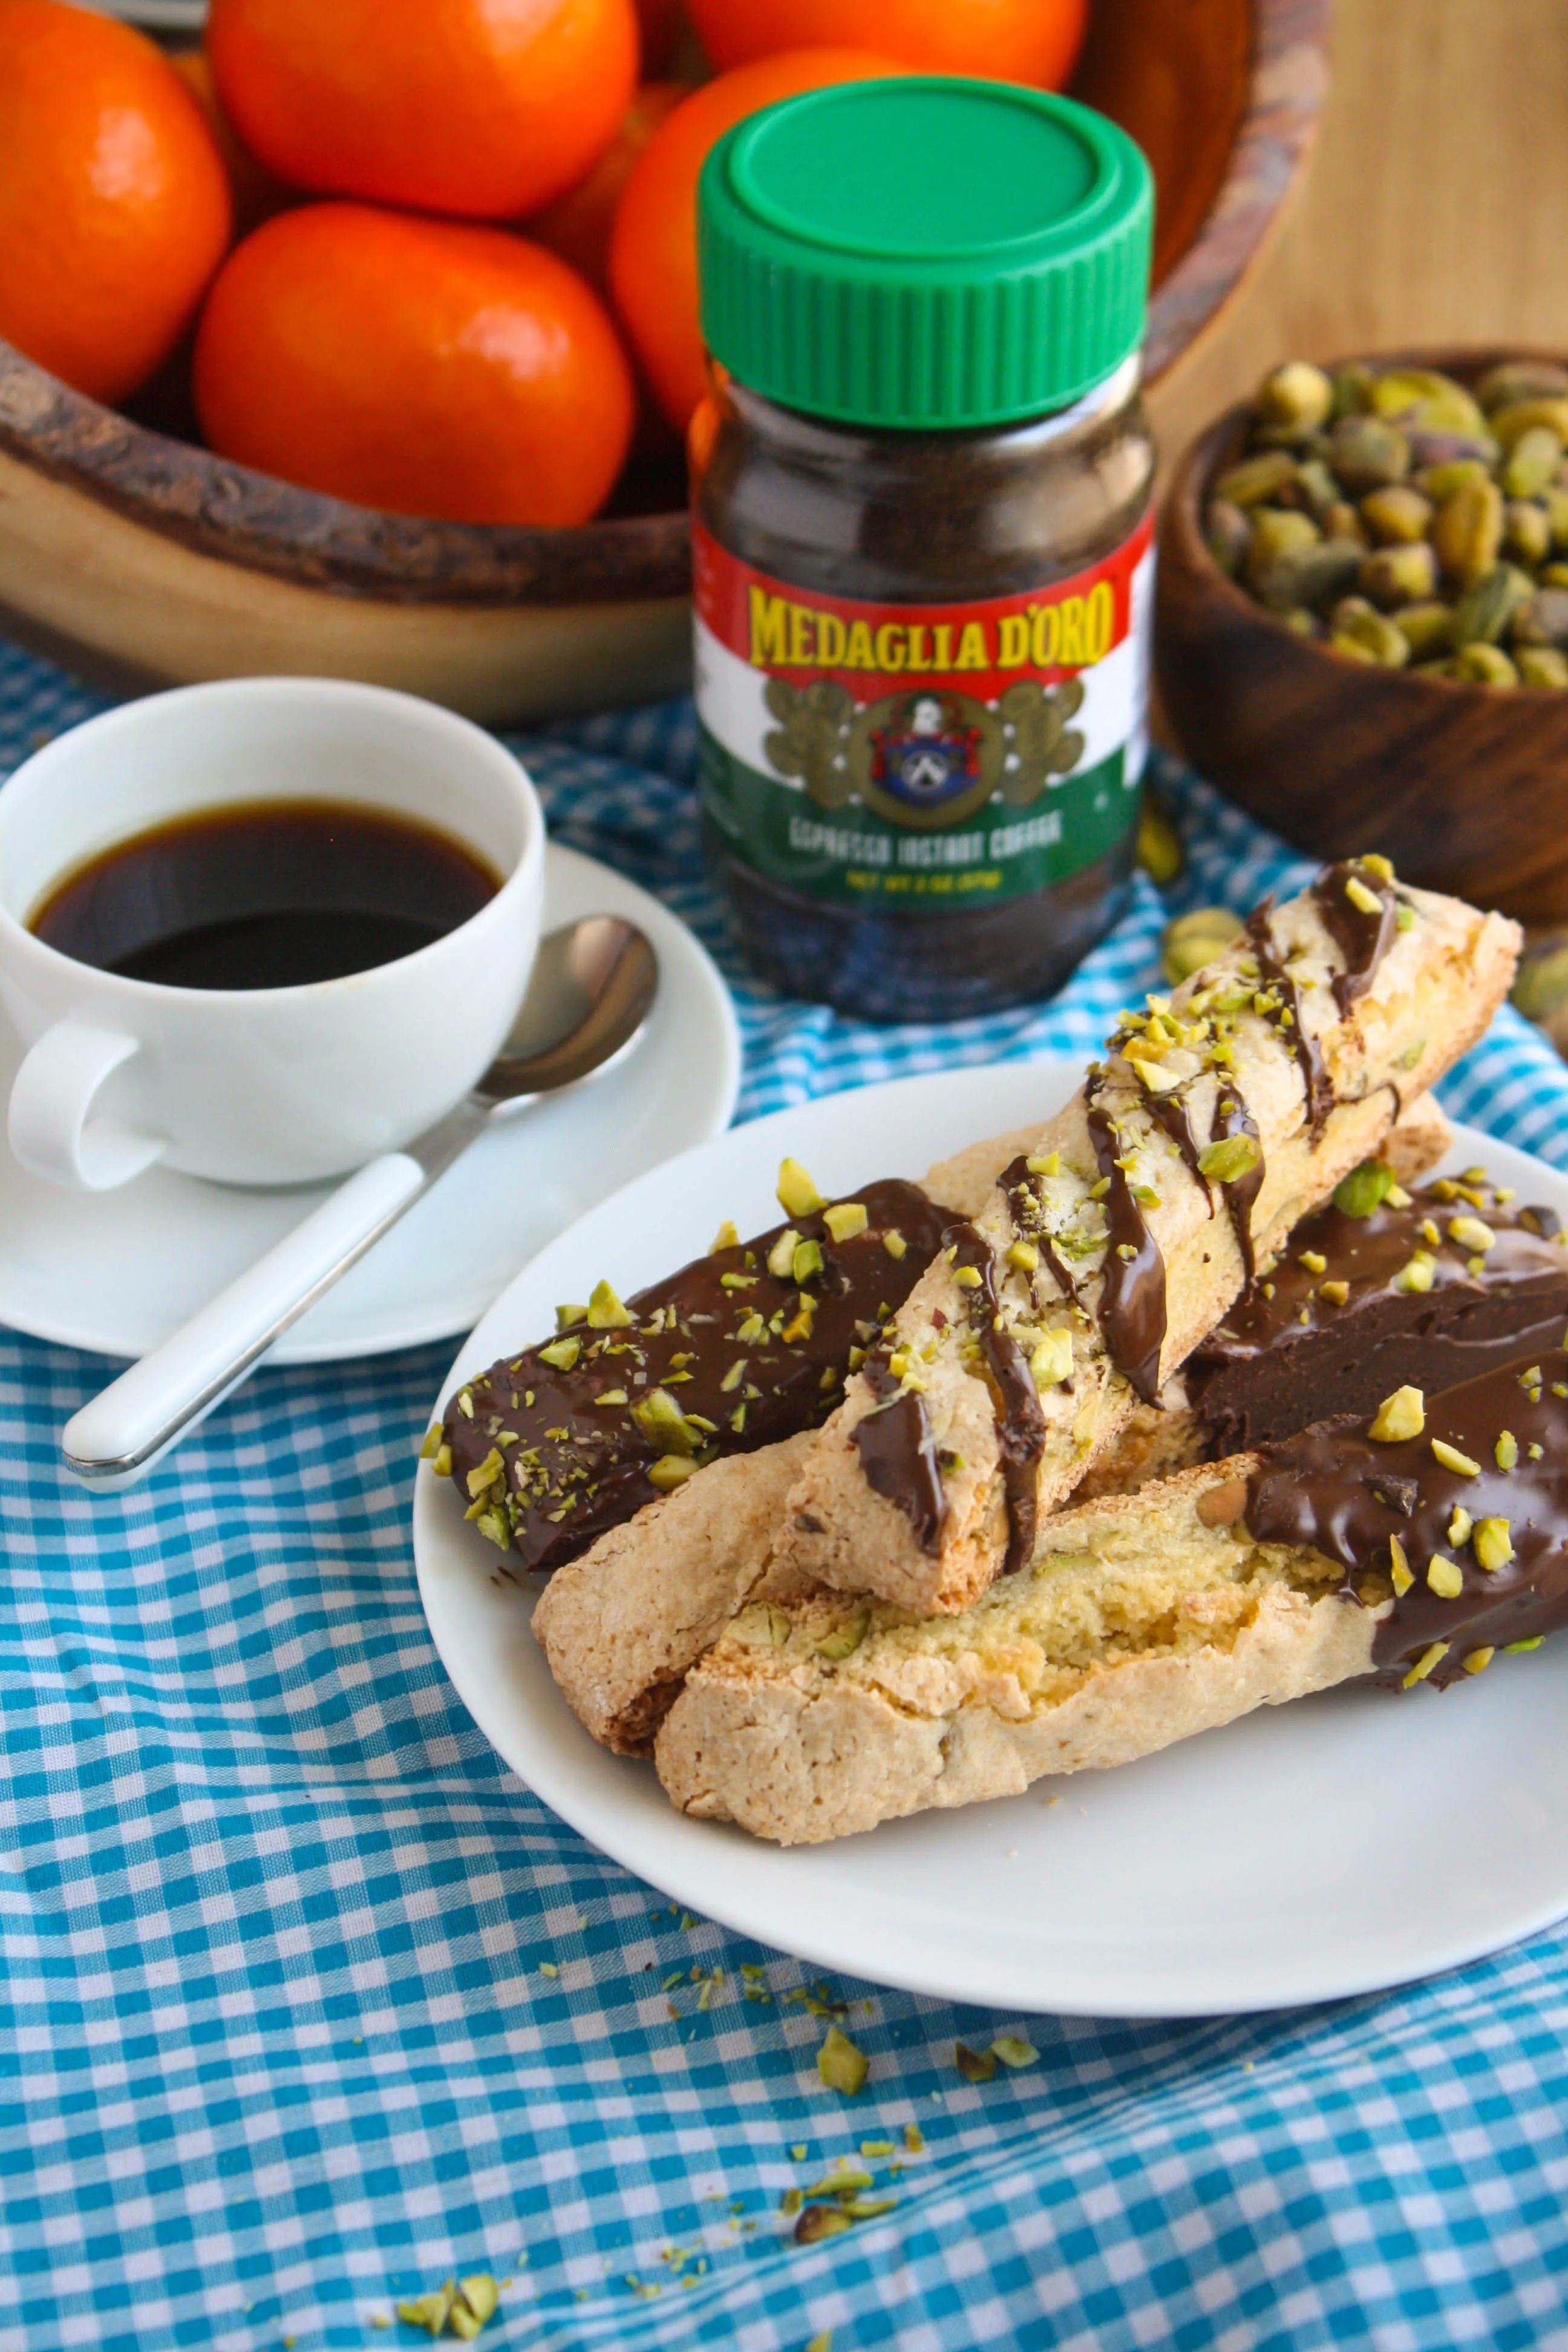 Chocolate-Espresso Dipped Orange and Pistachio Biscotti are such tasty cookies! You could serve these treats anytime, even at breakfast with coffee, or for dessert!